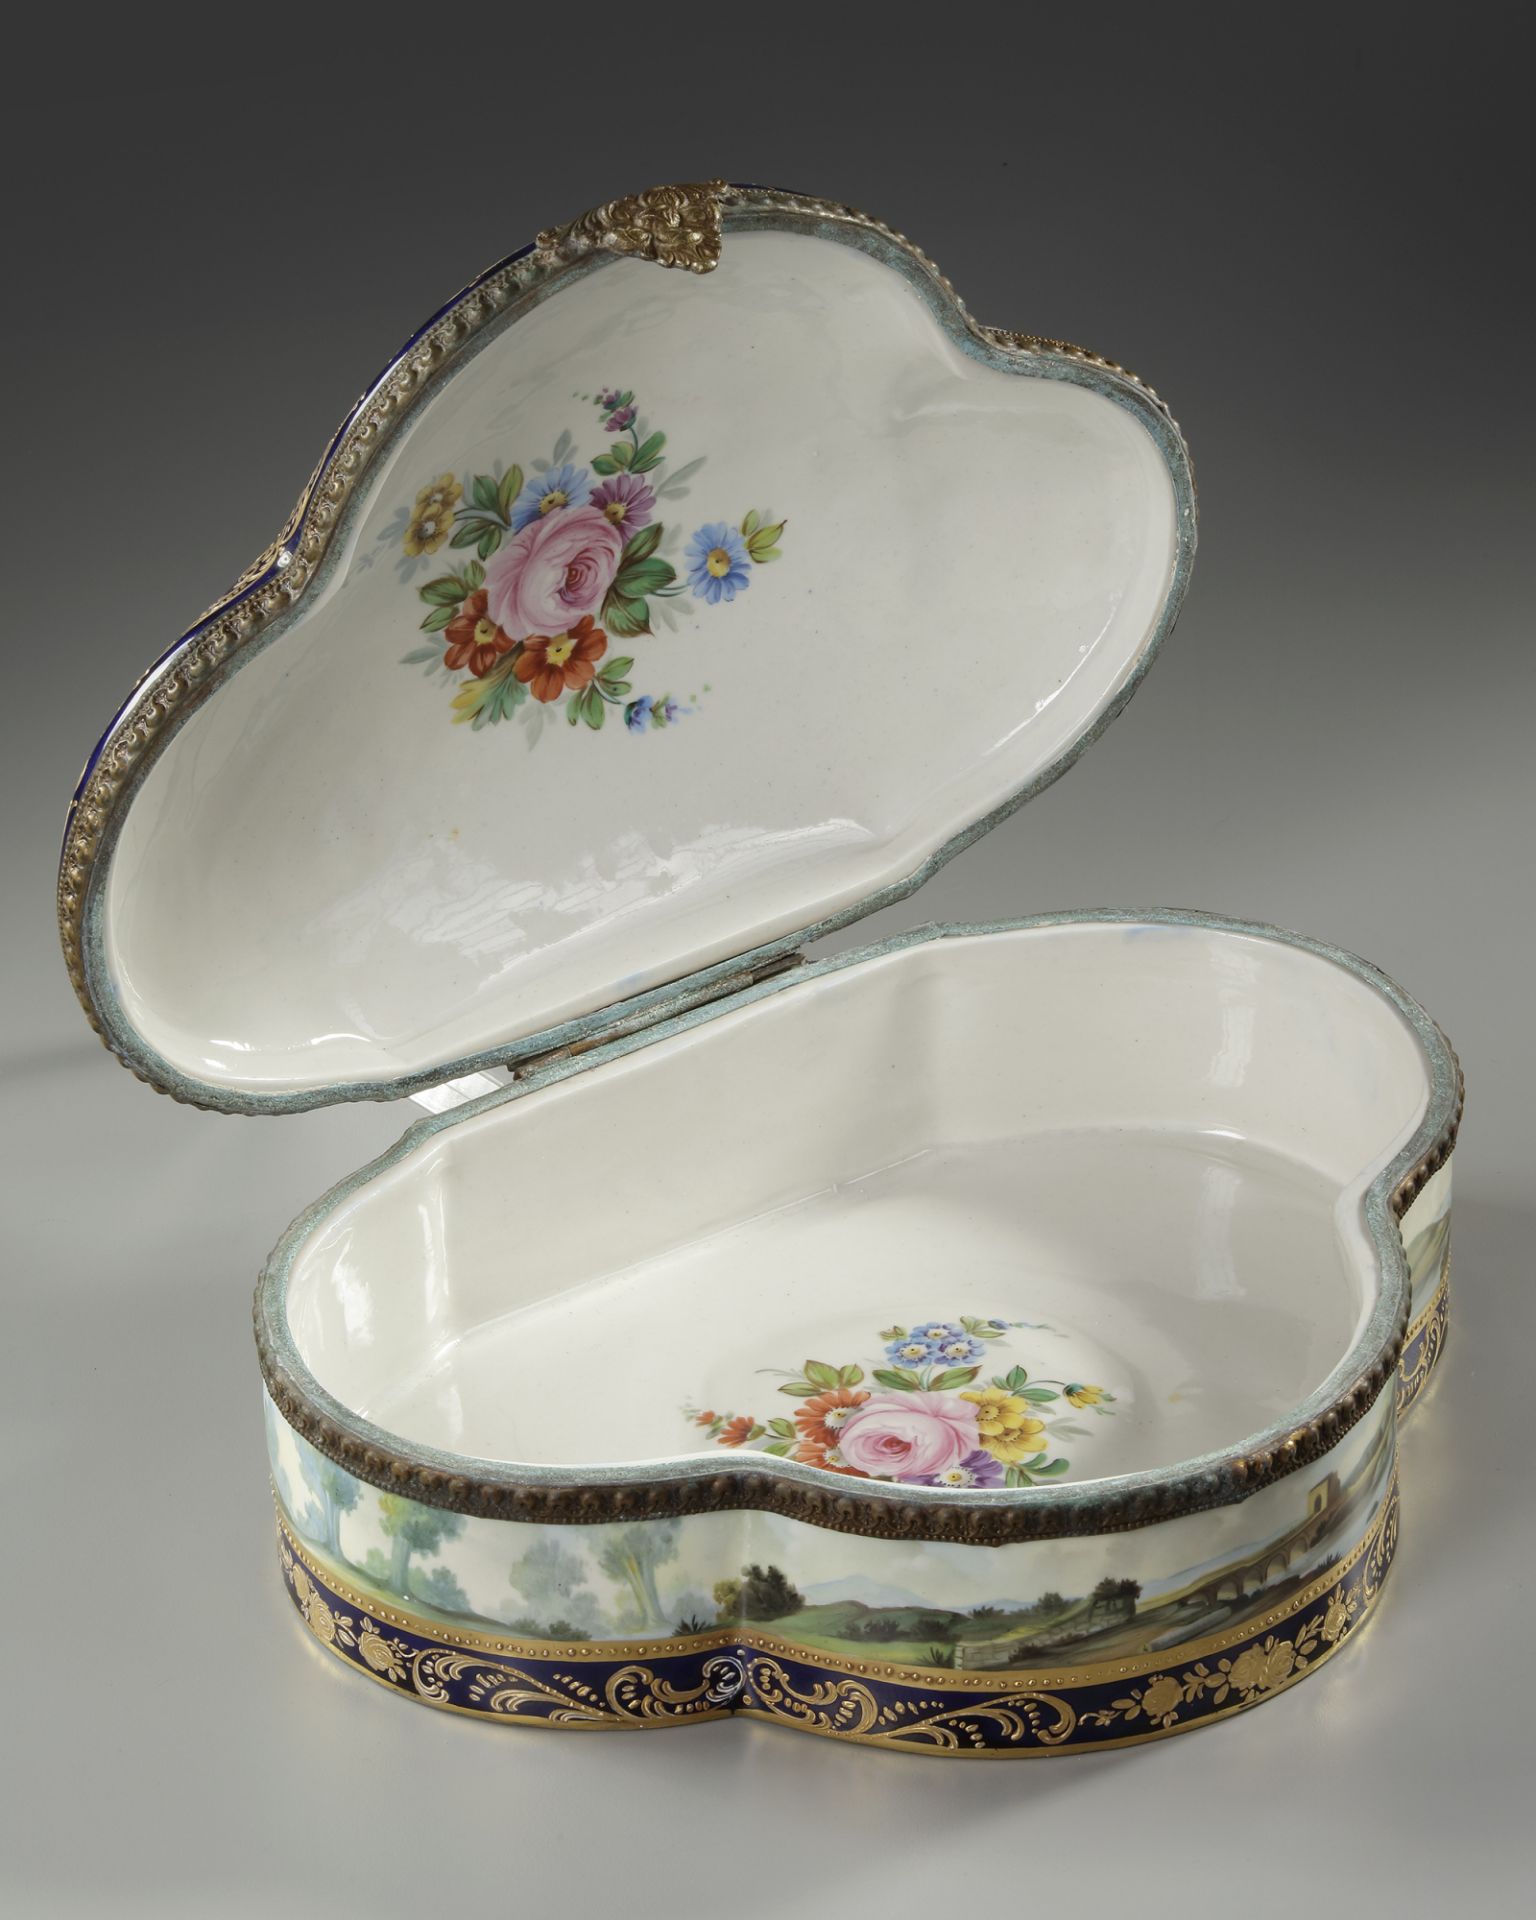 A PORCELAIN JEWELRY BOX, 19TH CENTURY - Image 4 of 4